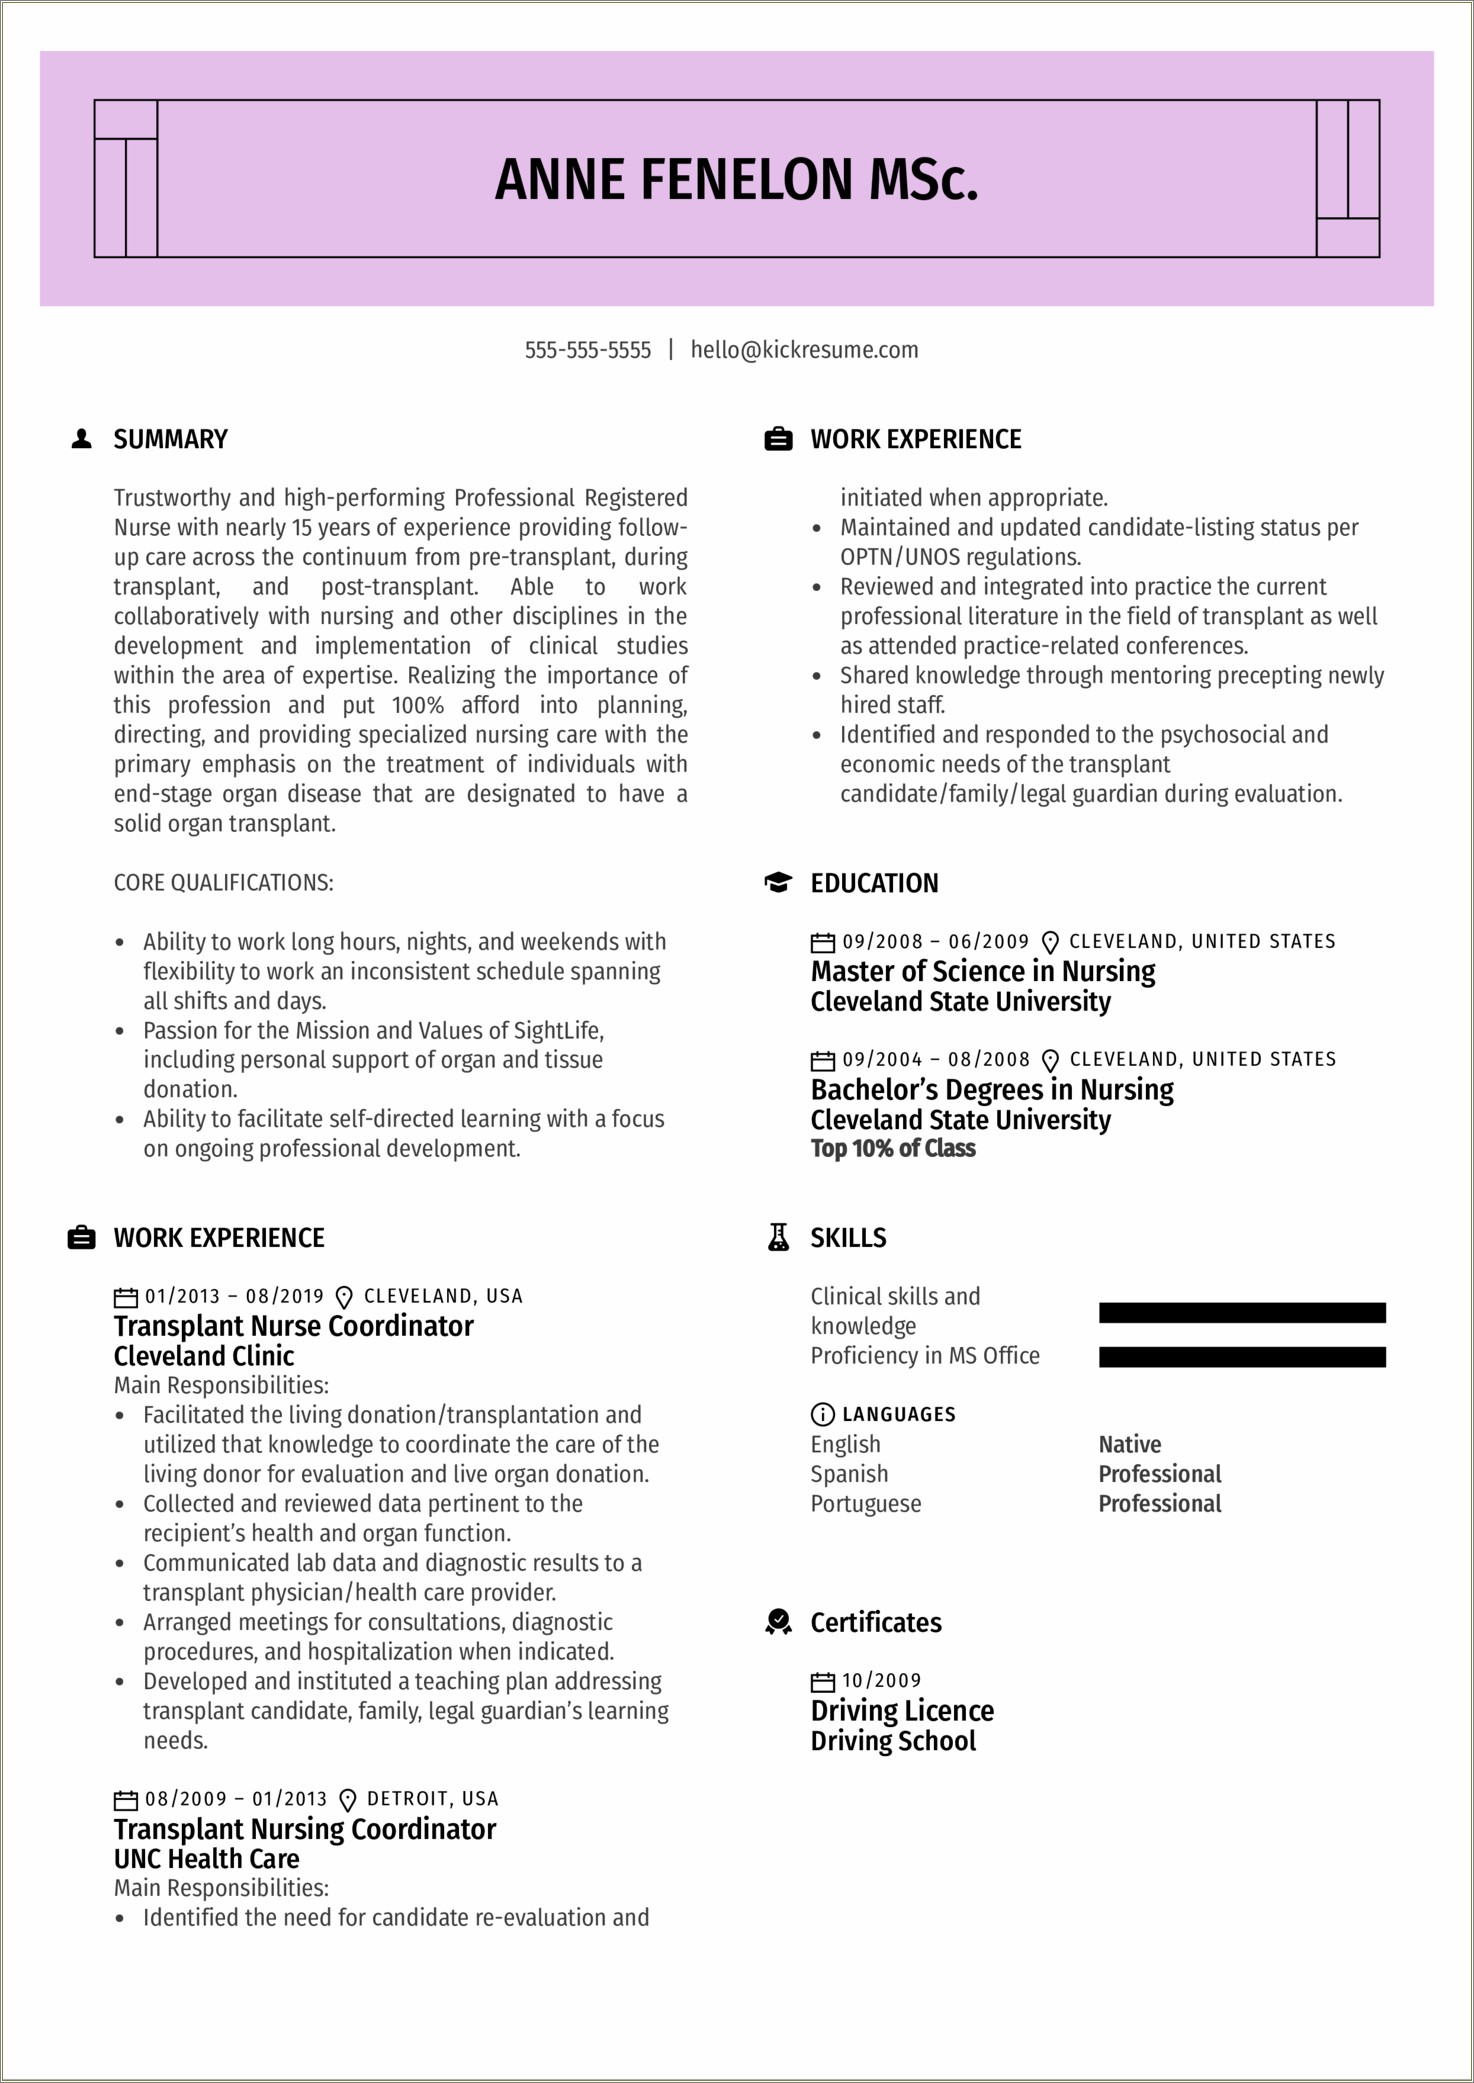 Rn Case Manager Office Hospice Resume